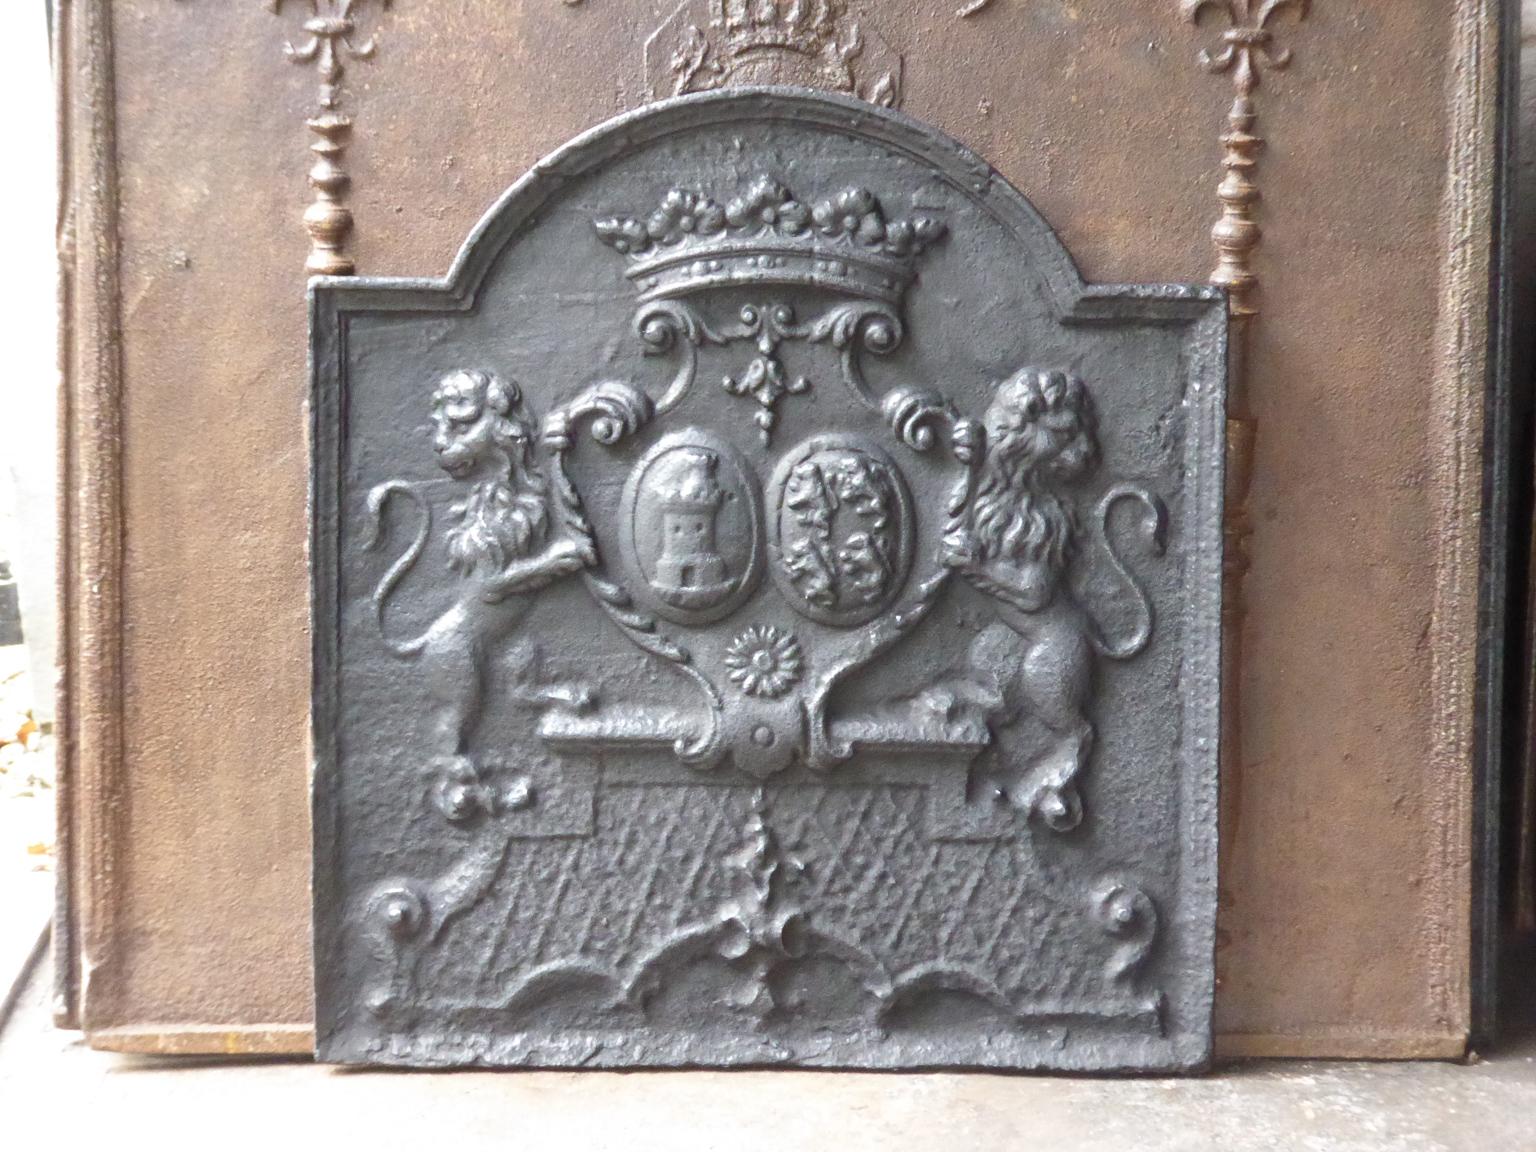 Fireback with the coat of arms of the alliance of Des Salles and Beauvau. Described by P. Palasi ('Plaques de cheminées héraldiques'; item 430).

The fireback is made of cast iron and has a black / pewter patina. It is in a good condition and does